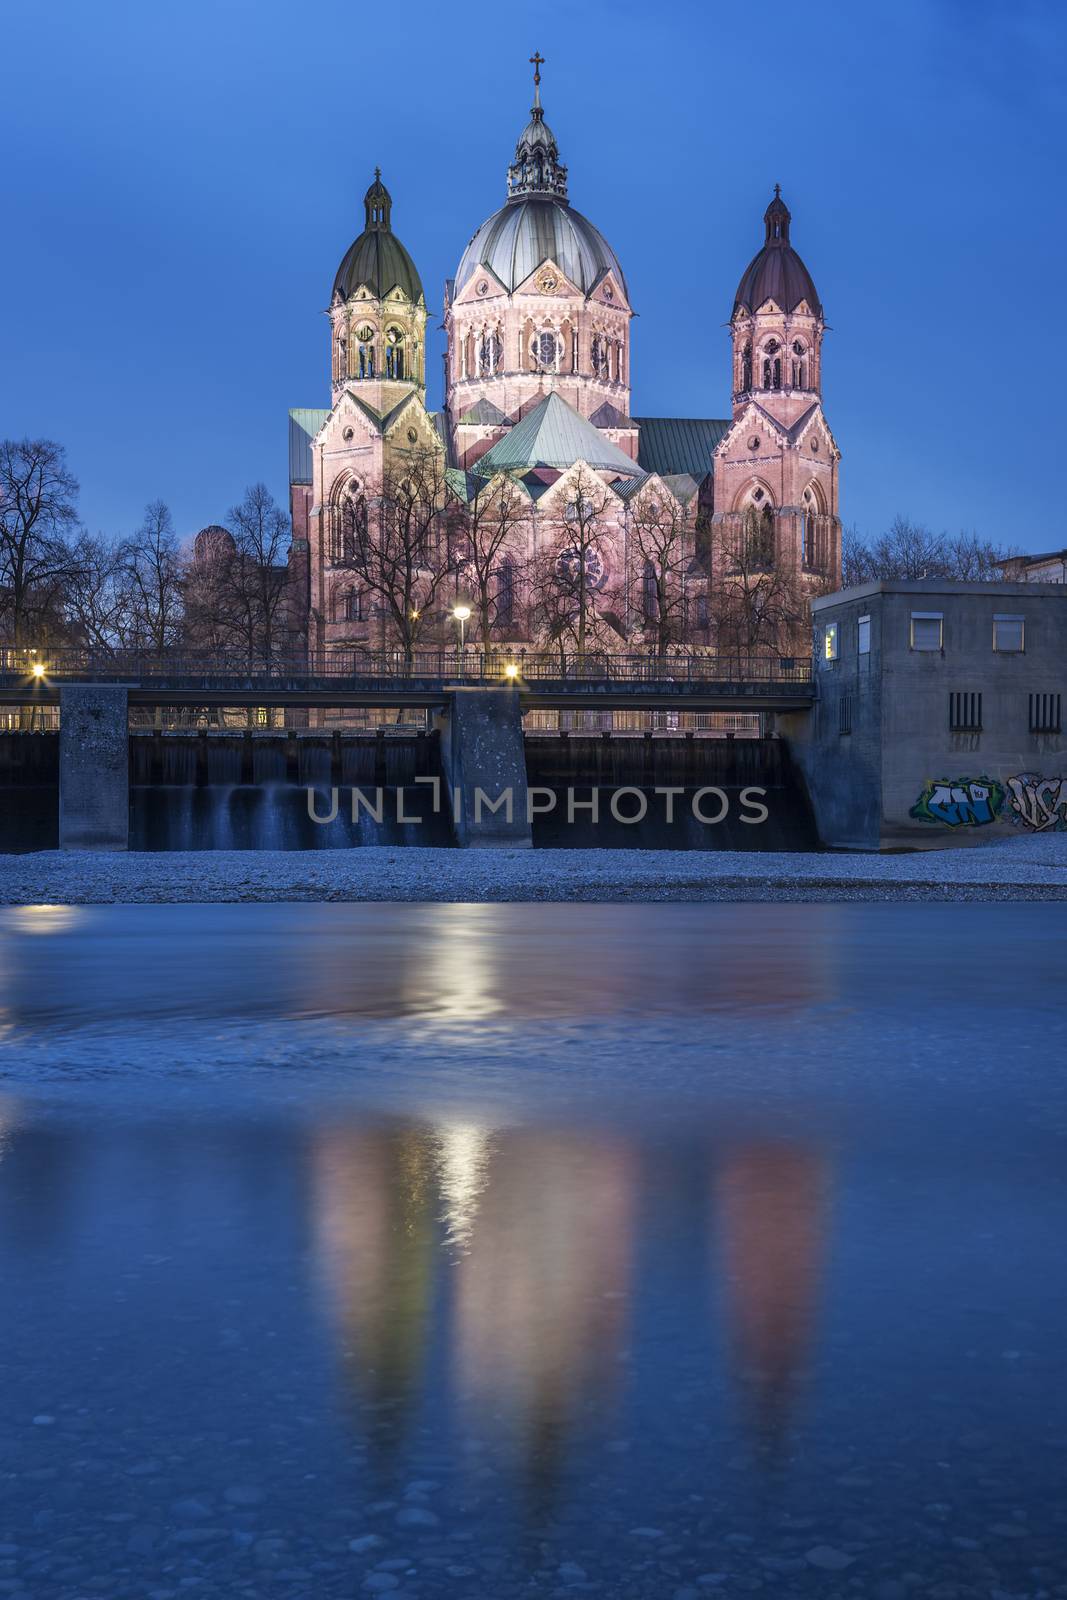 St. Luke Church, is the largest Protestant church in Munich, Germany